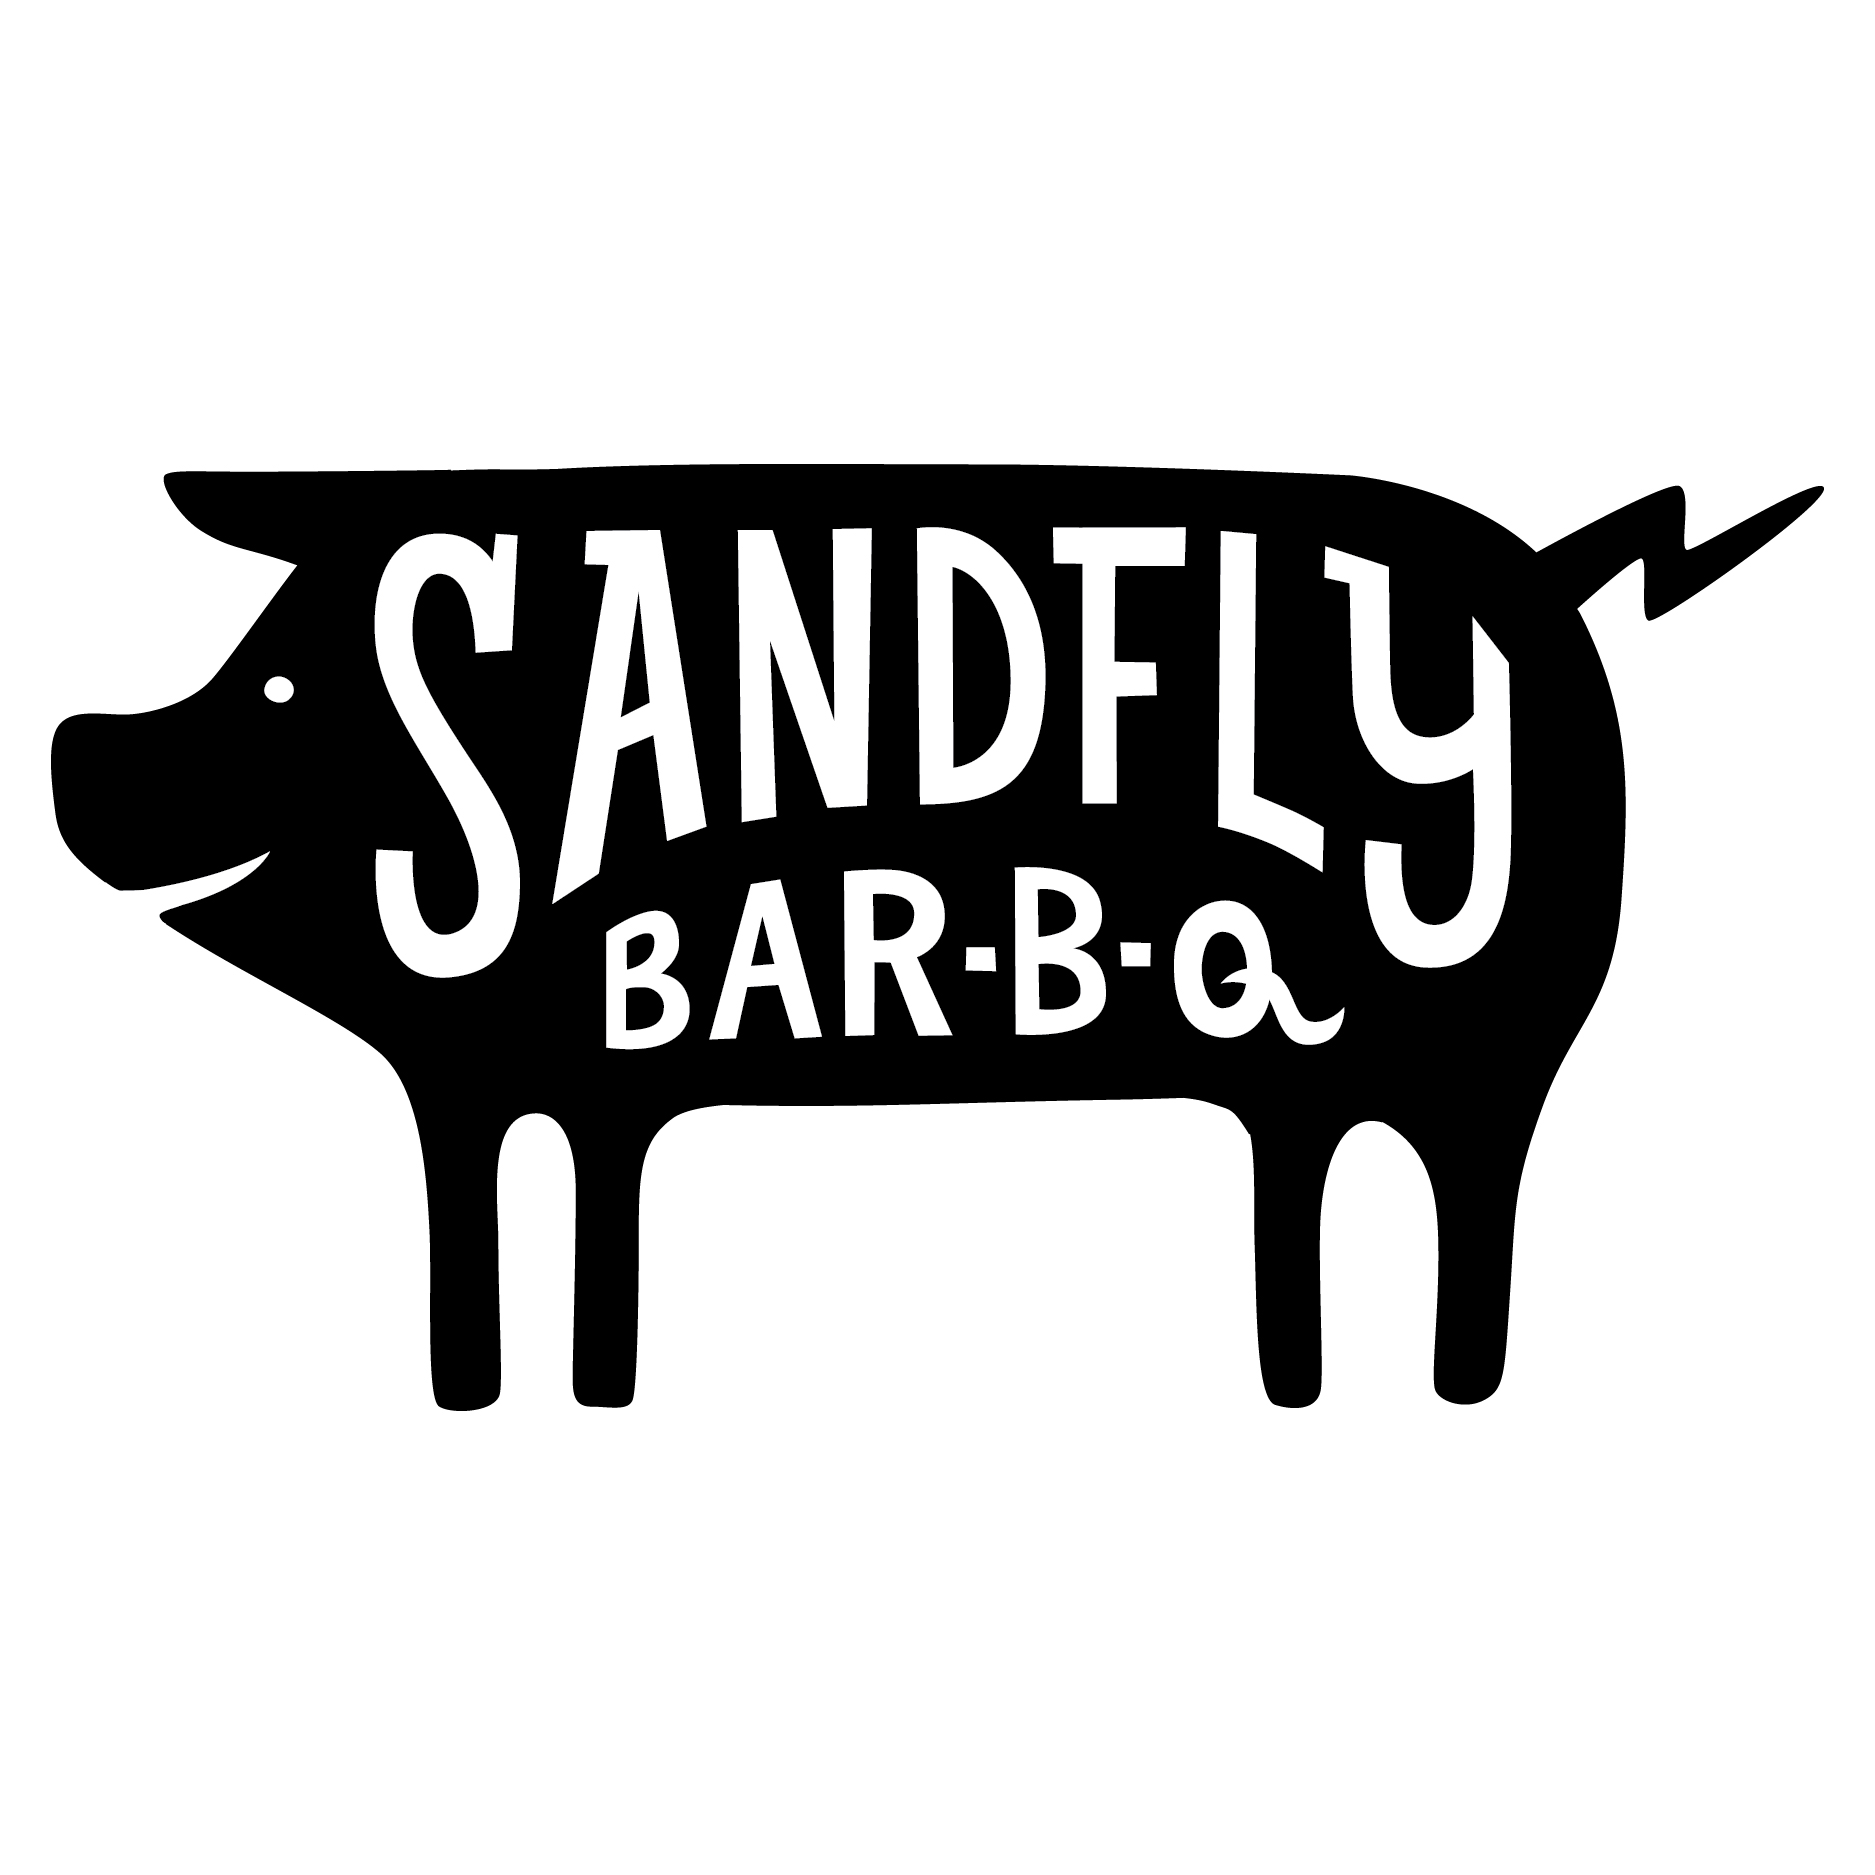 Sandfly Bar-B-Q logo design by logo designer Kay Wolfersperger for your inspiration and for the worlds largest logo competition